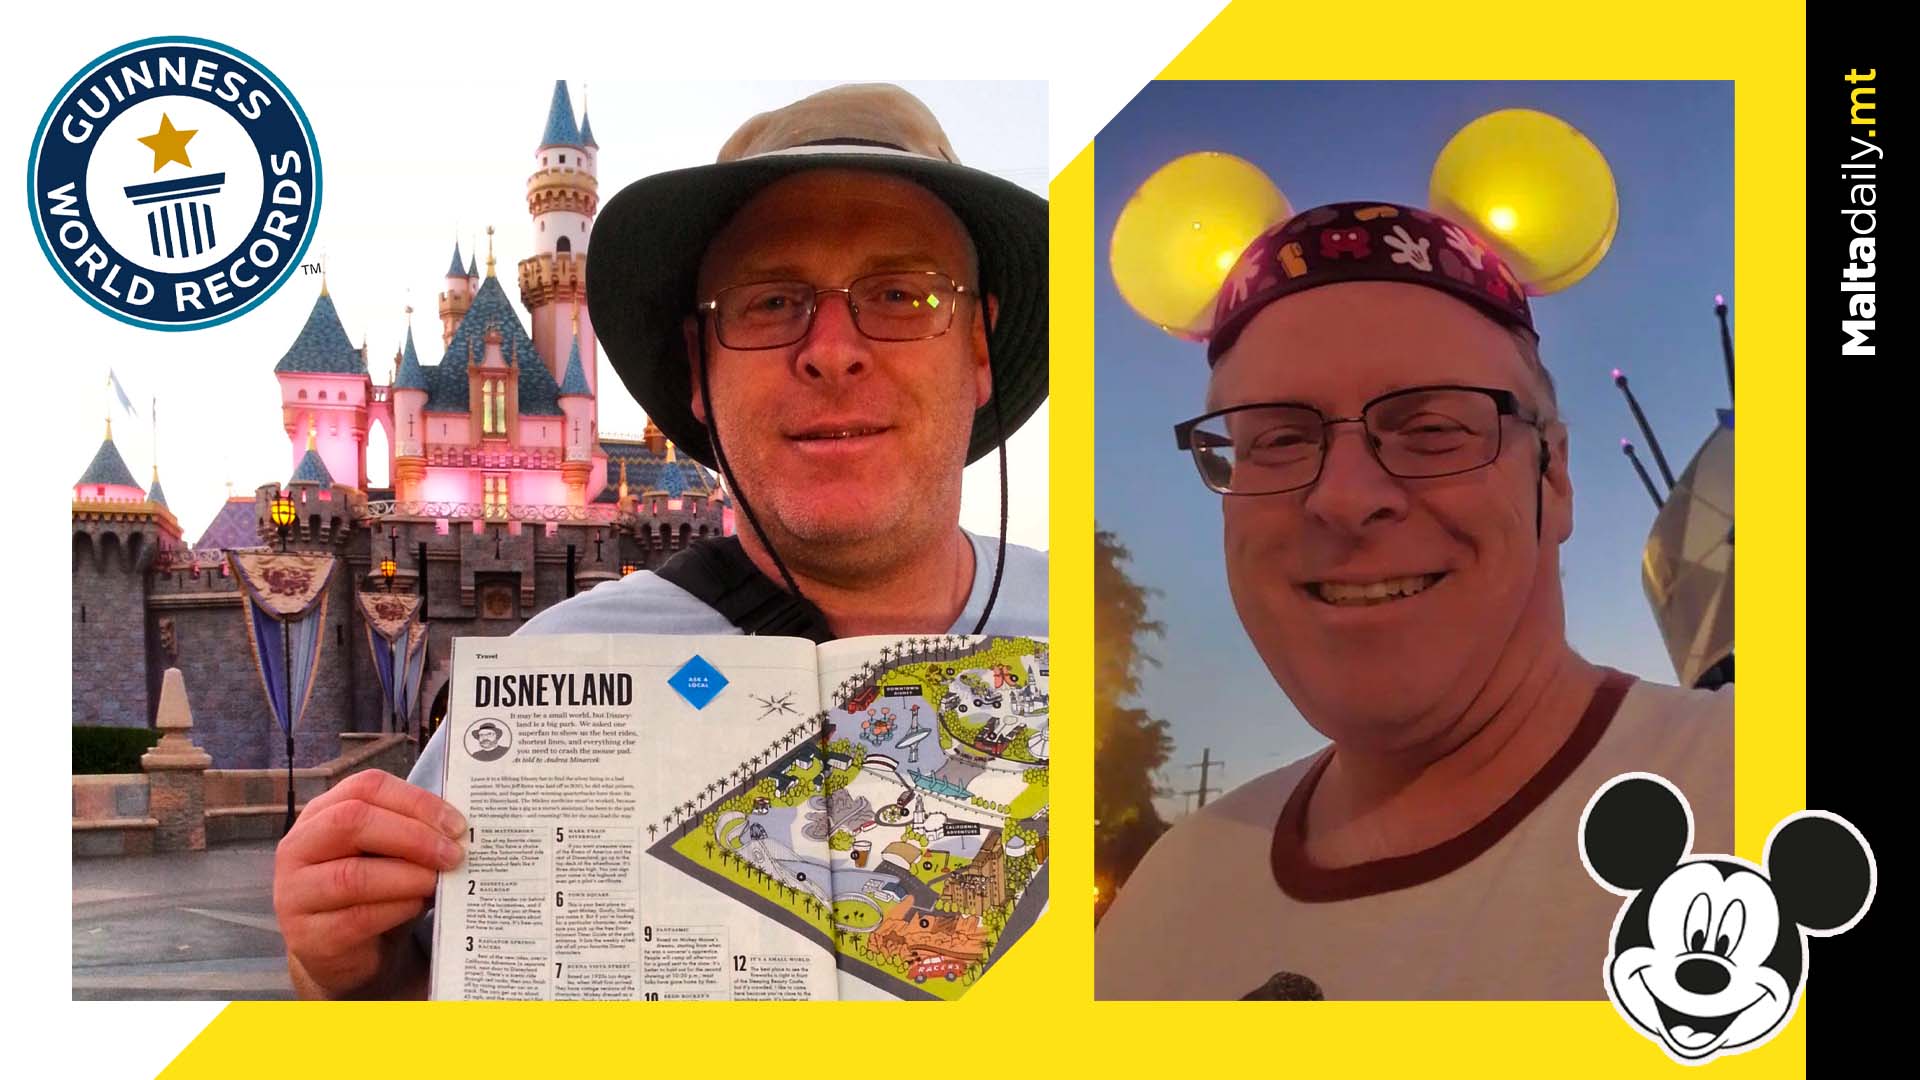 Man breaks world record for visiting Disneyland up to 3000 times